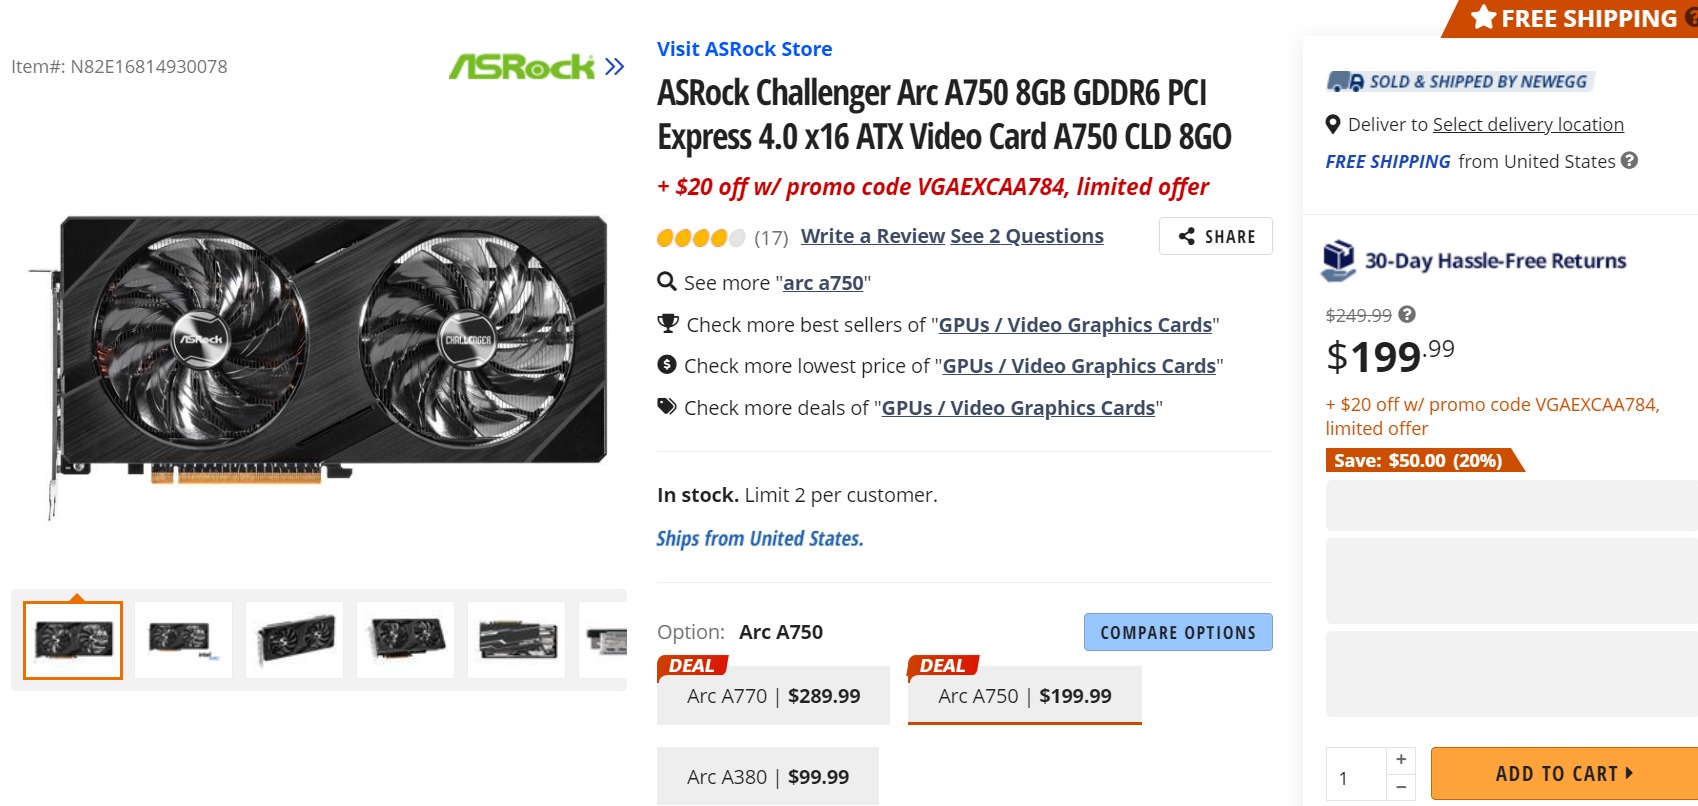 ASRock Arc A750 Challenger 8GB is now available for just $179